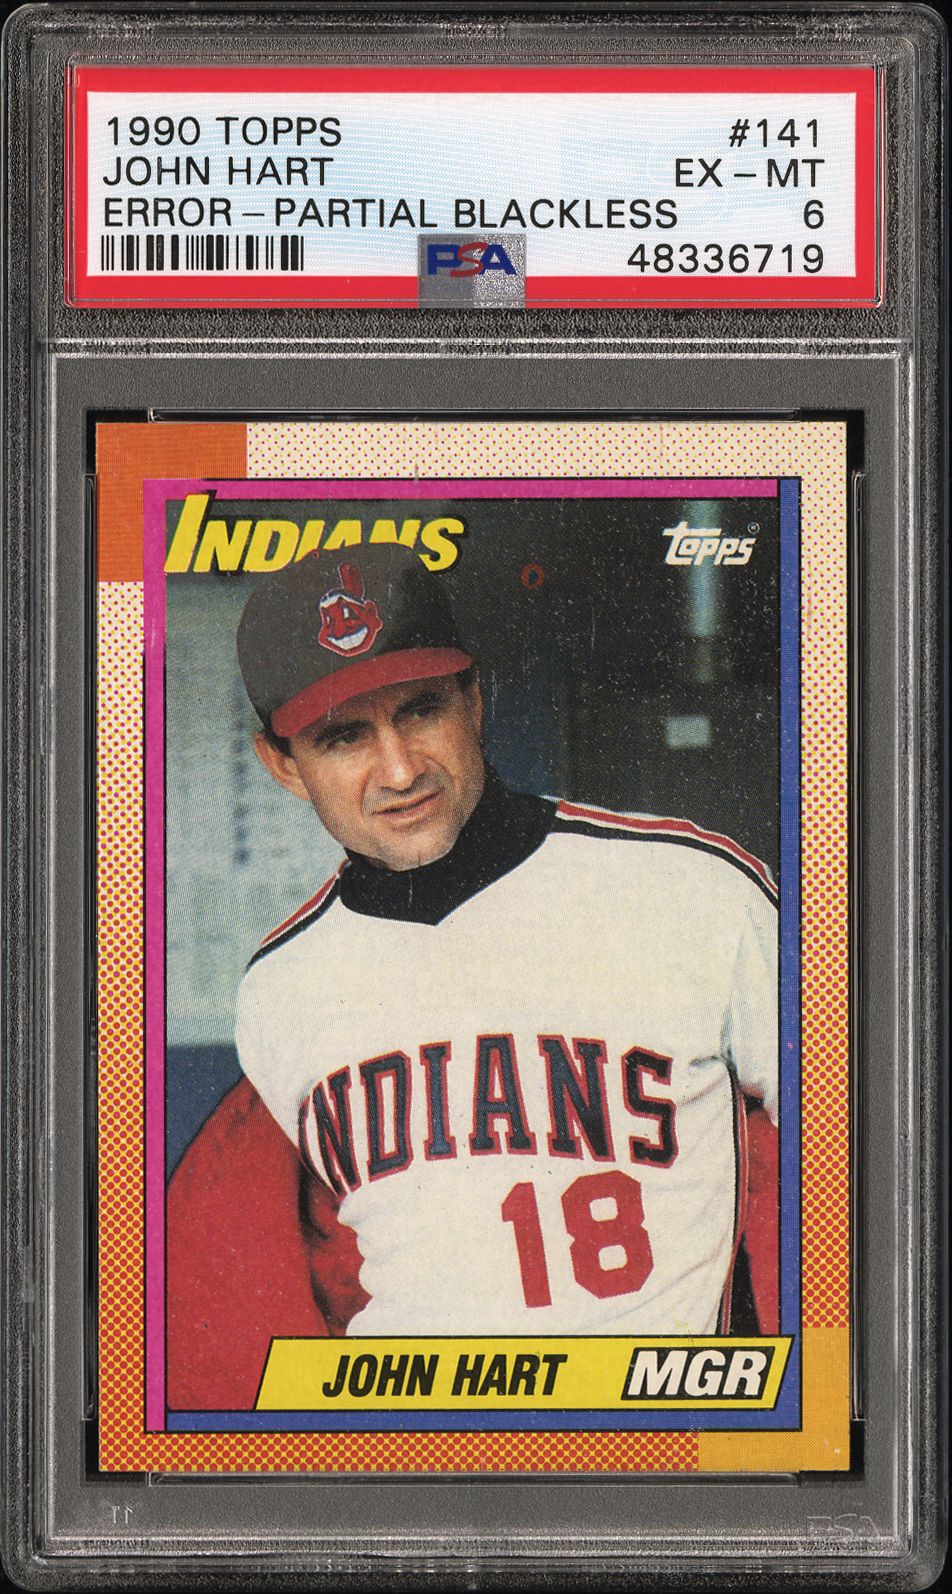 1990 Topps Blackless: Not Just for Big Hurt Anymore – Wax Pack Gods